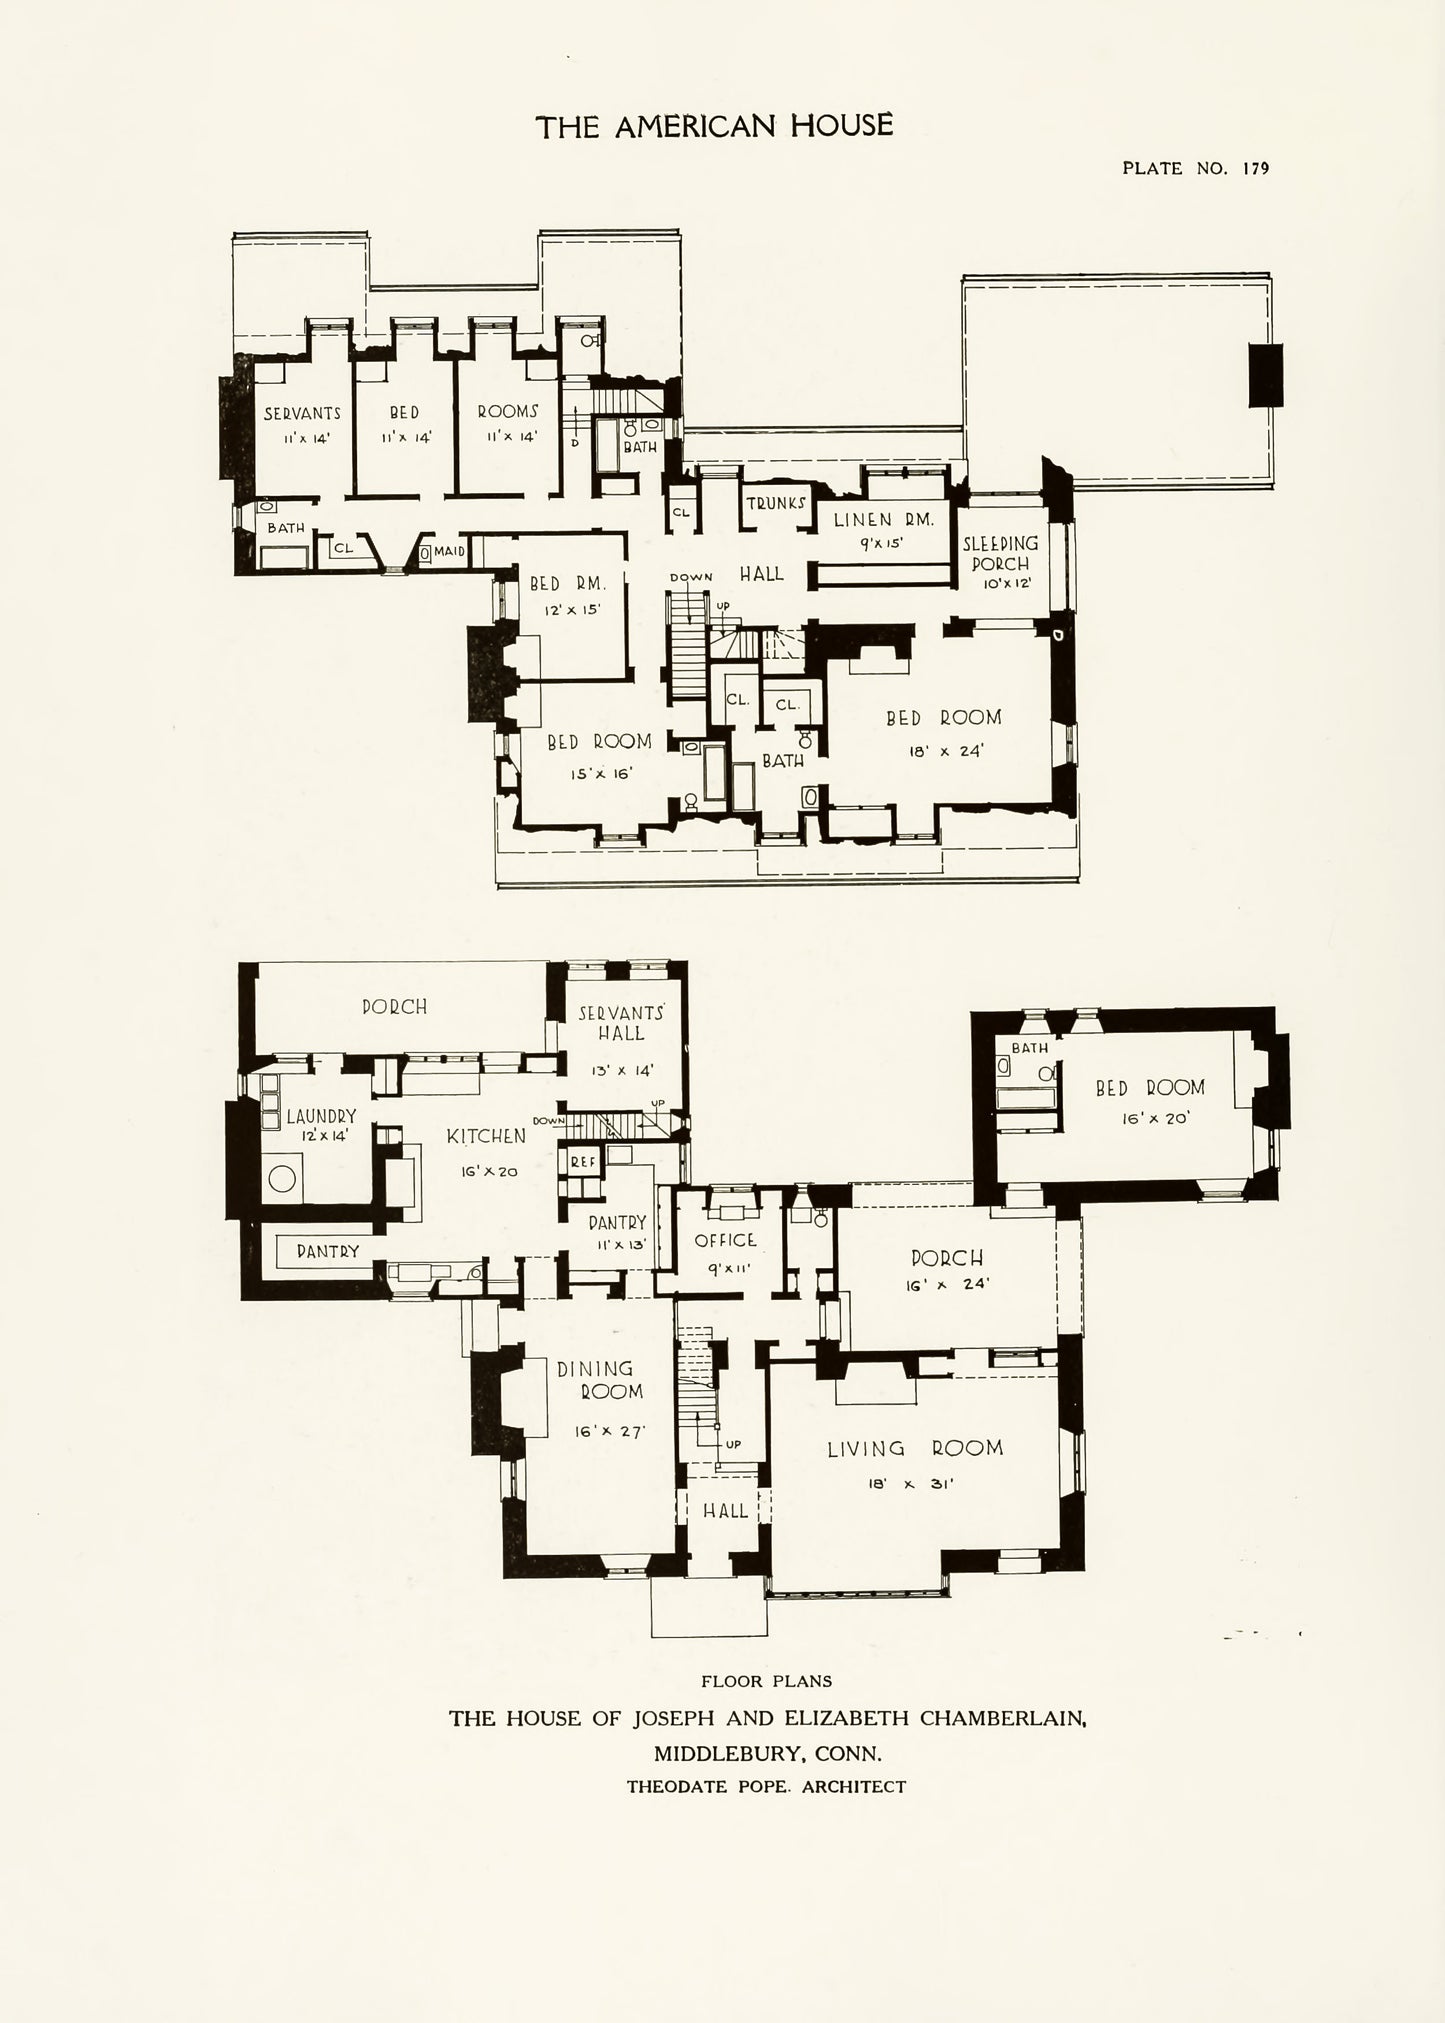 The American House Illustrations & Plans [40 Images]